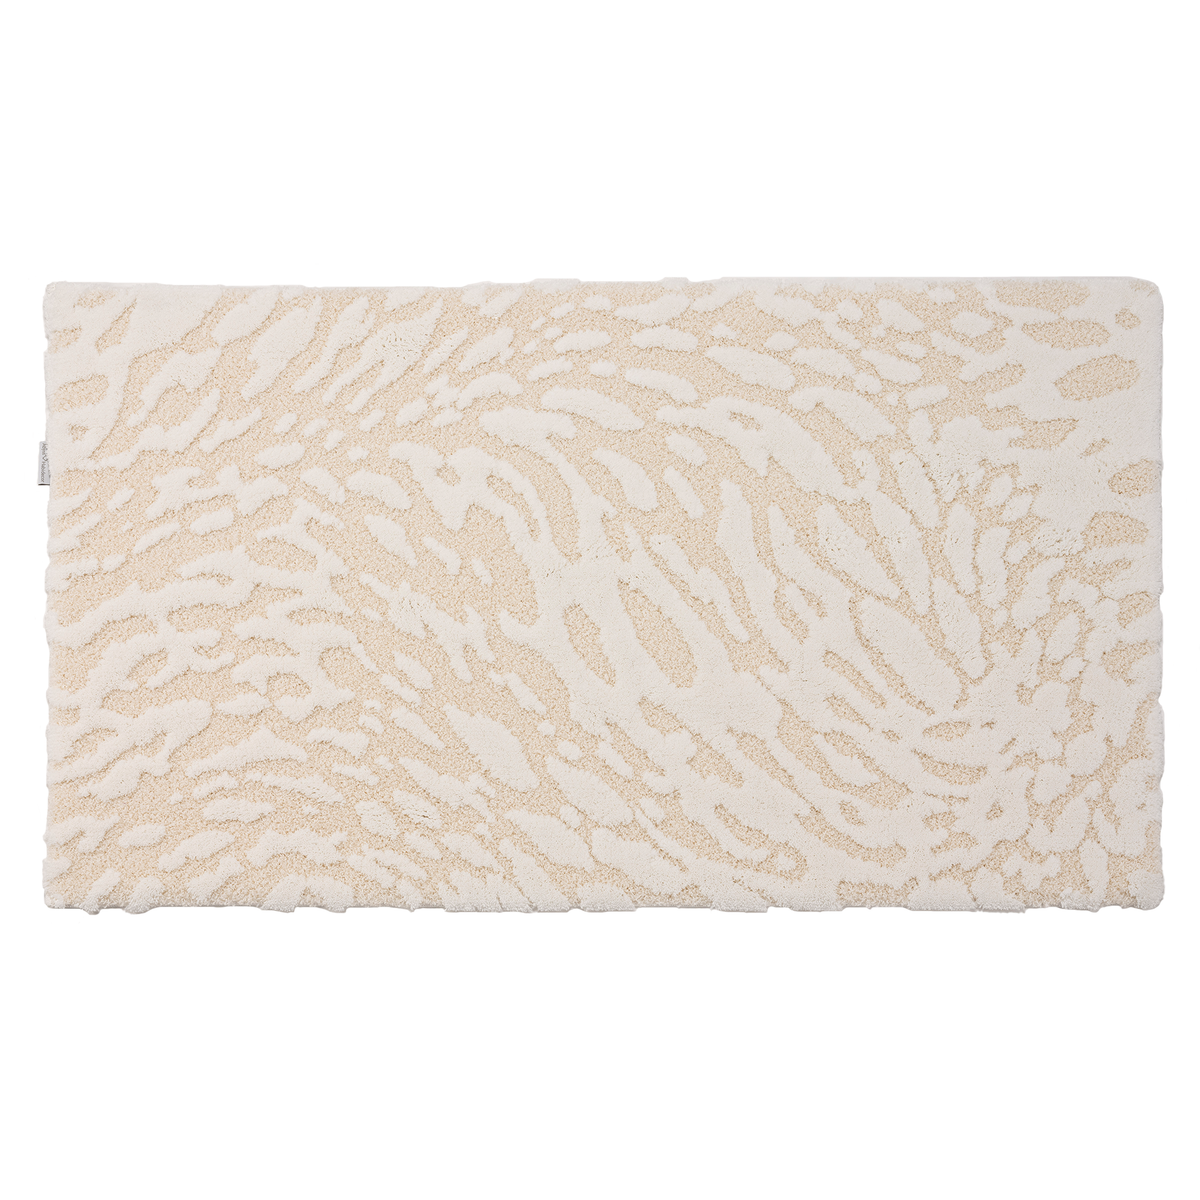 Silo Image of Abyss Habidecor Flow Bath Rugs in Color Ivory (103)